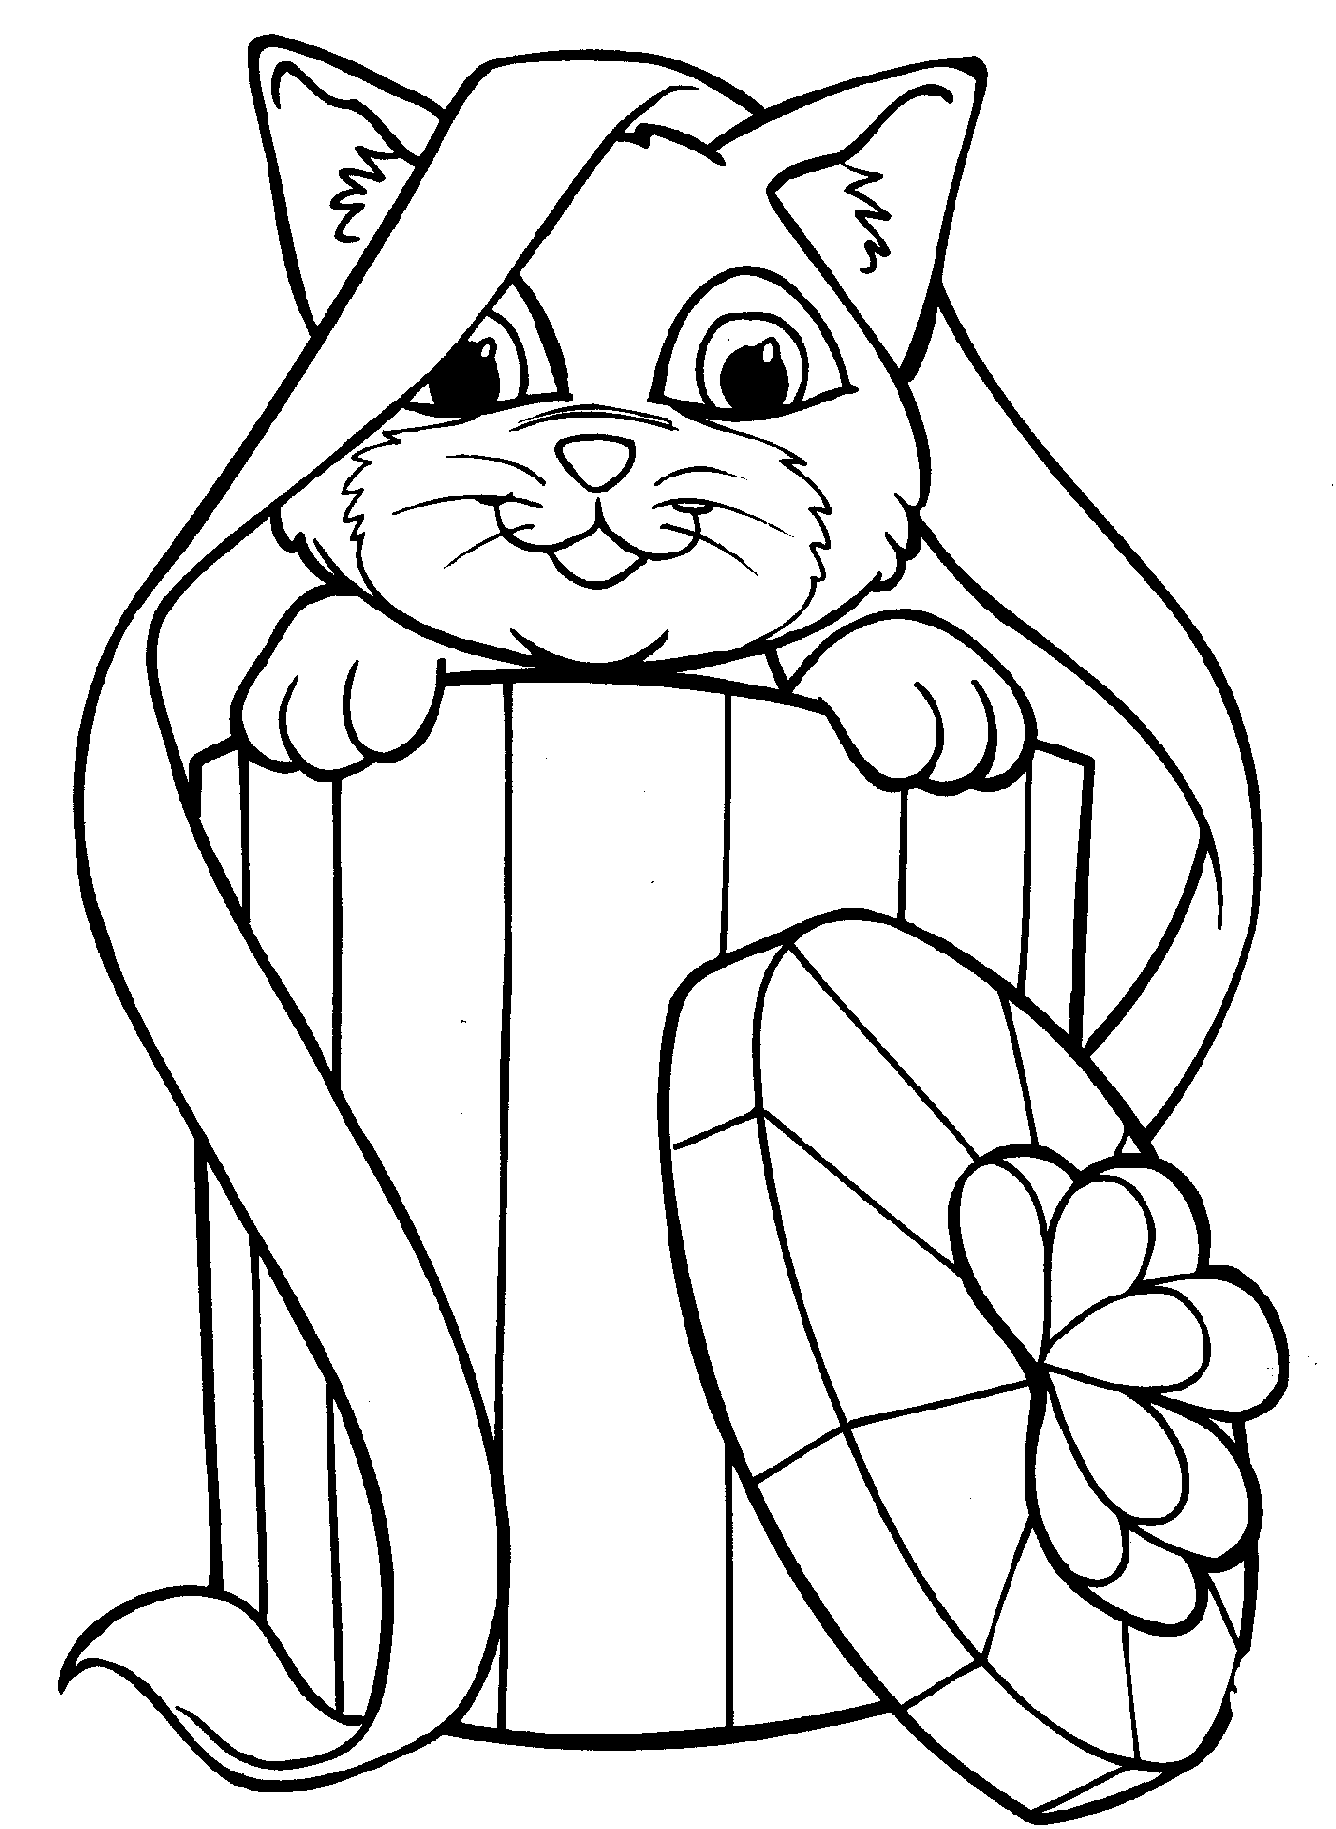 10  Kitten Coloring Pages to Print